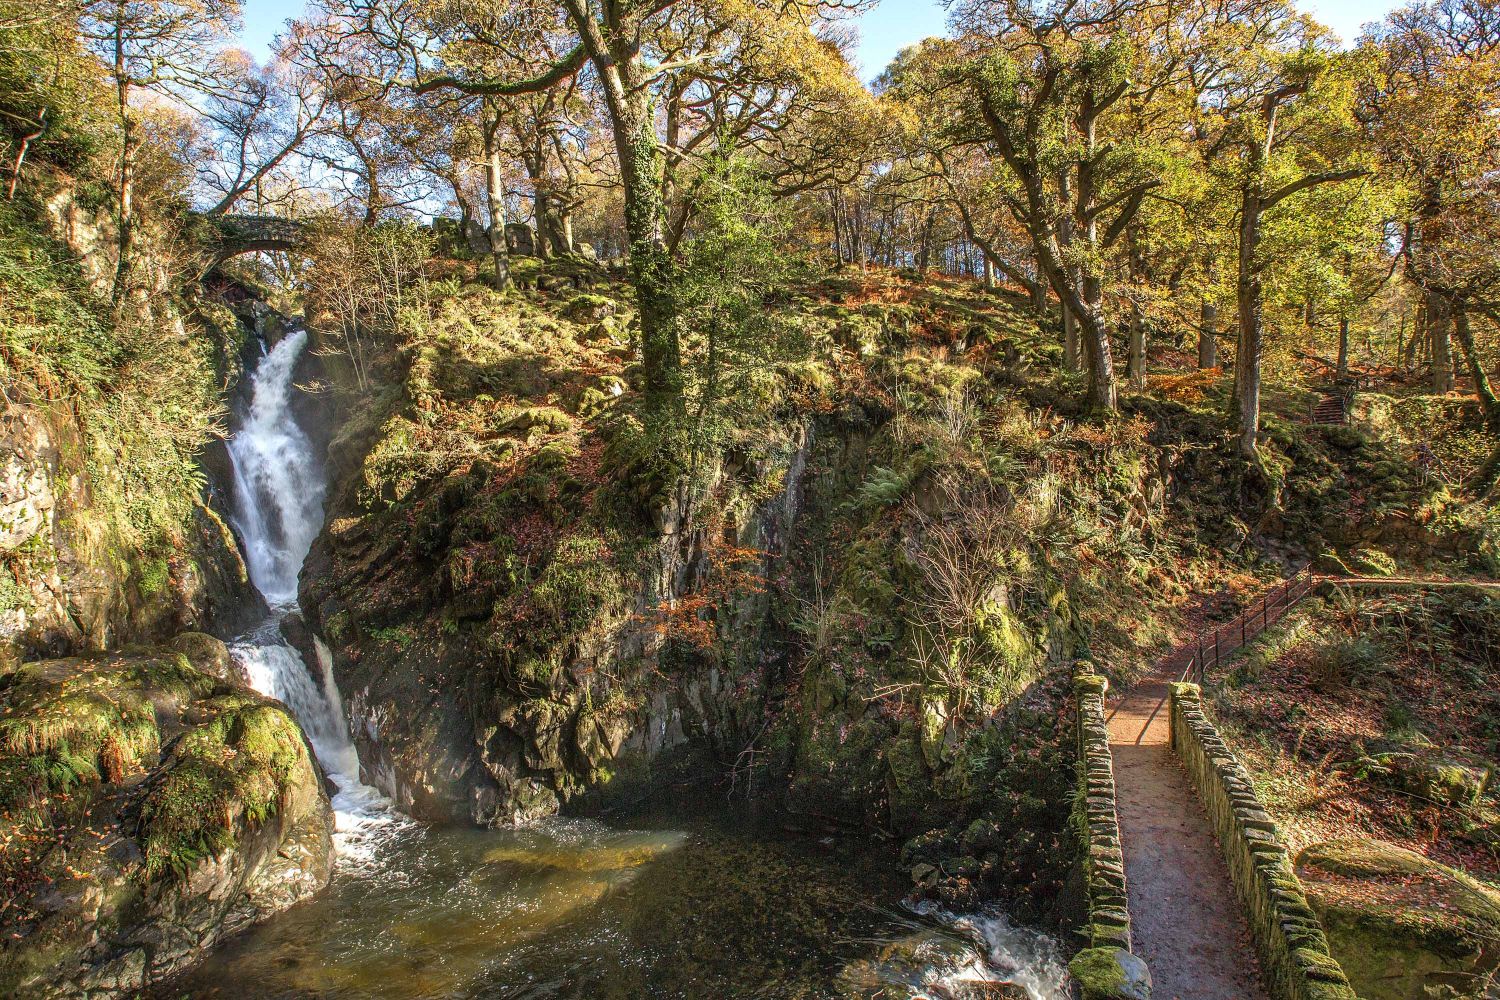 Autumn colours at Aira Force, Ullswater